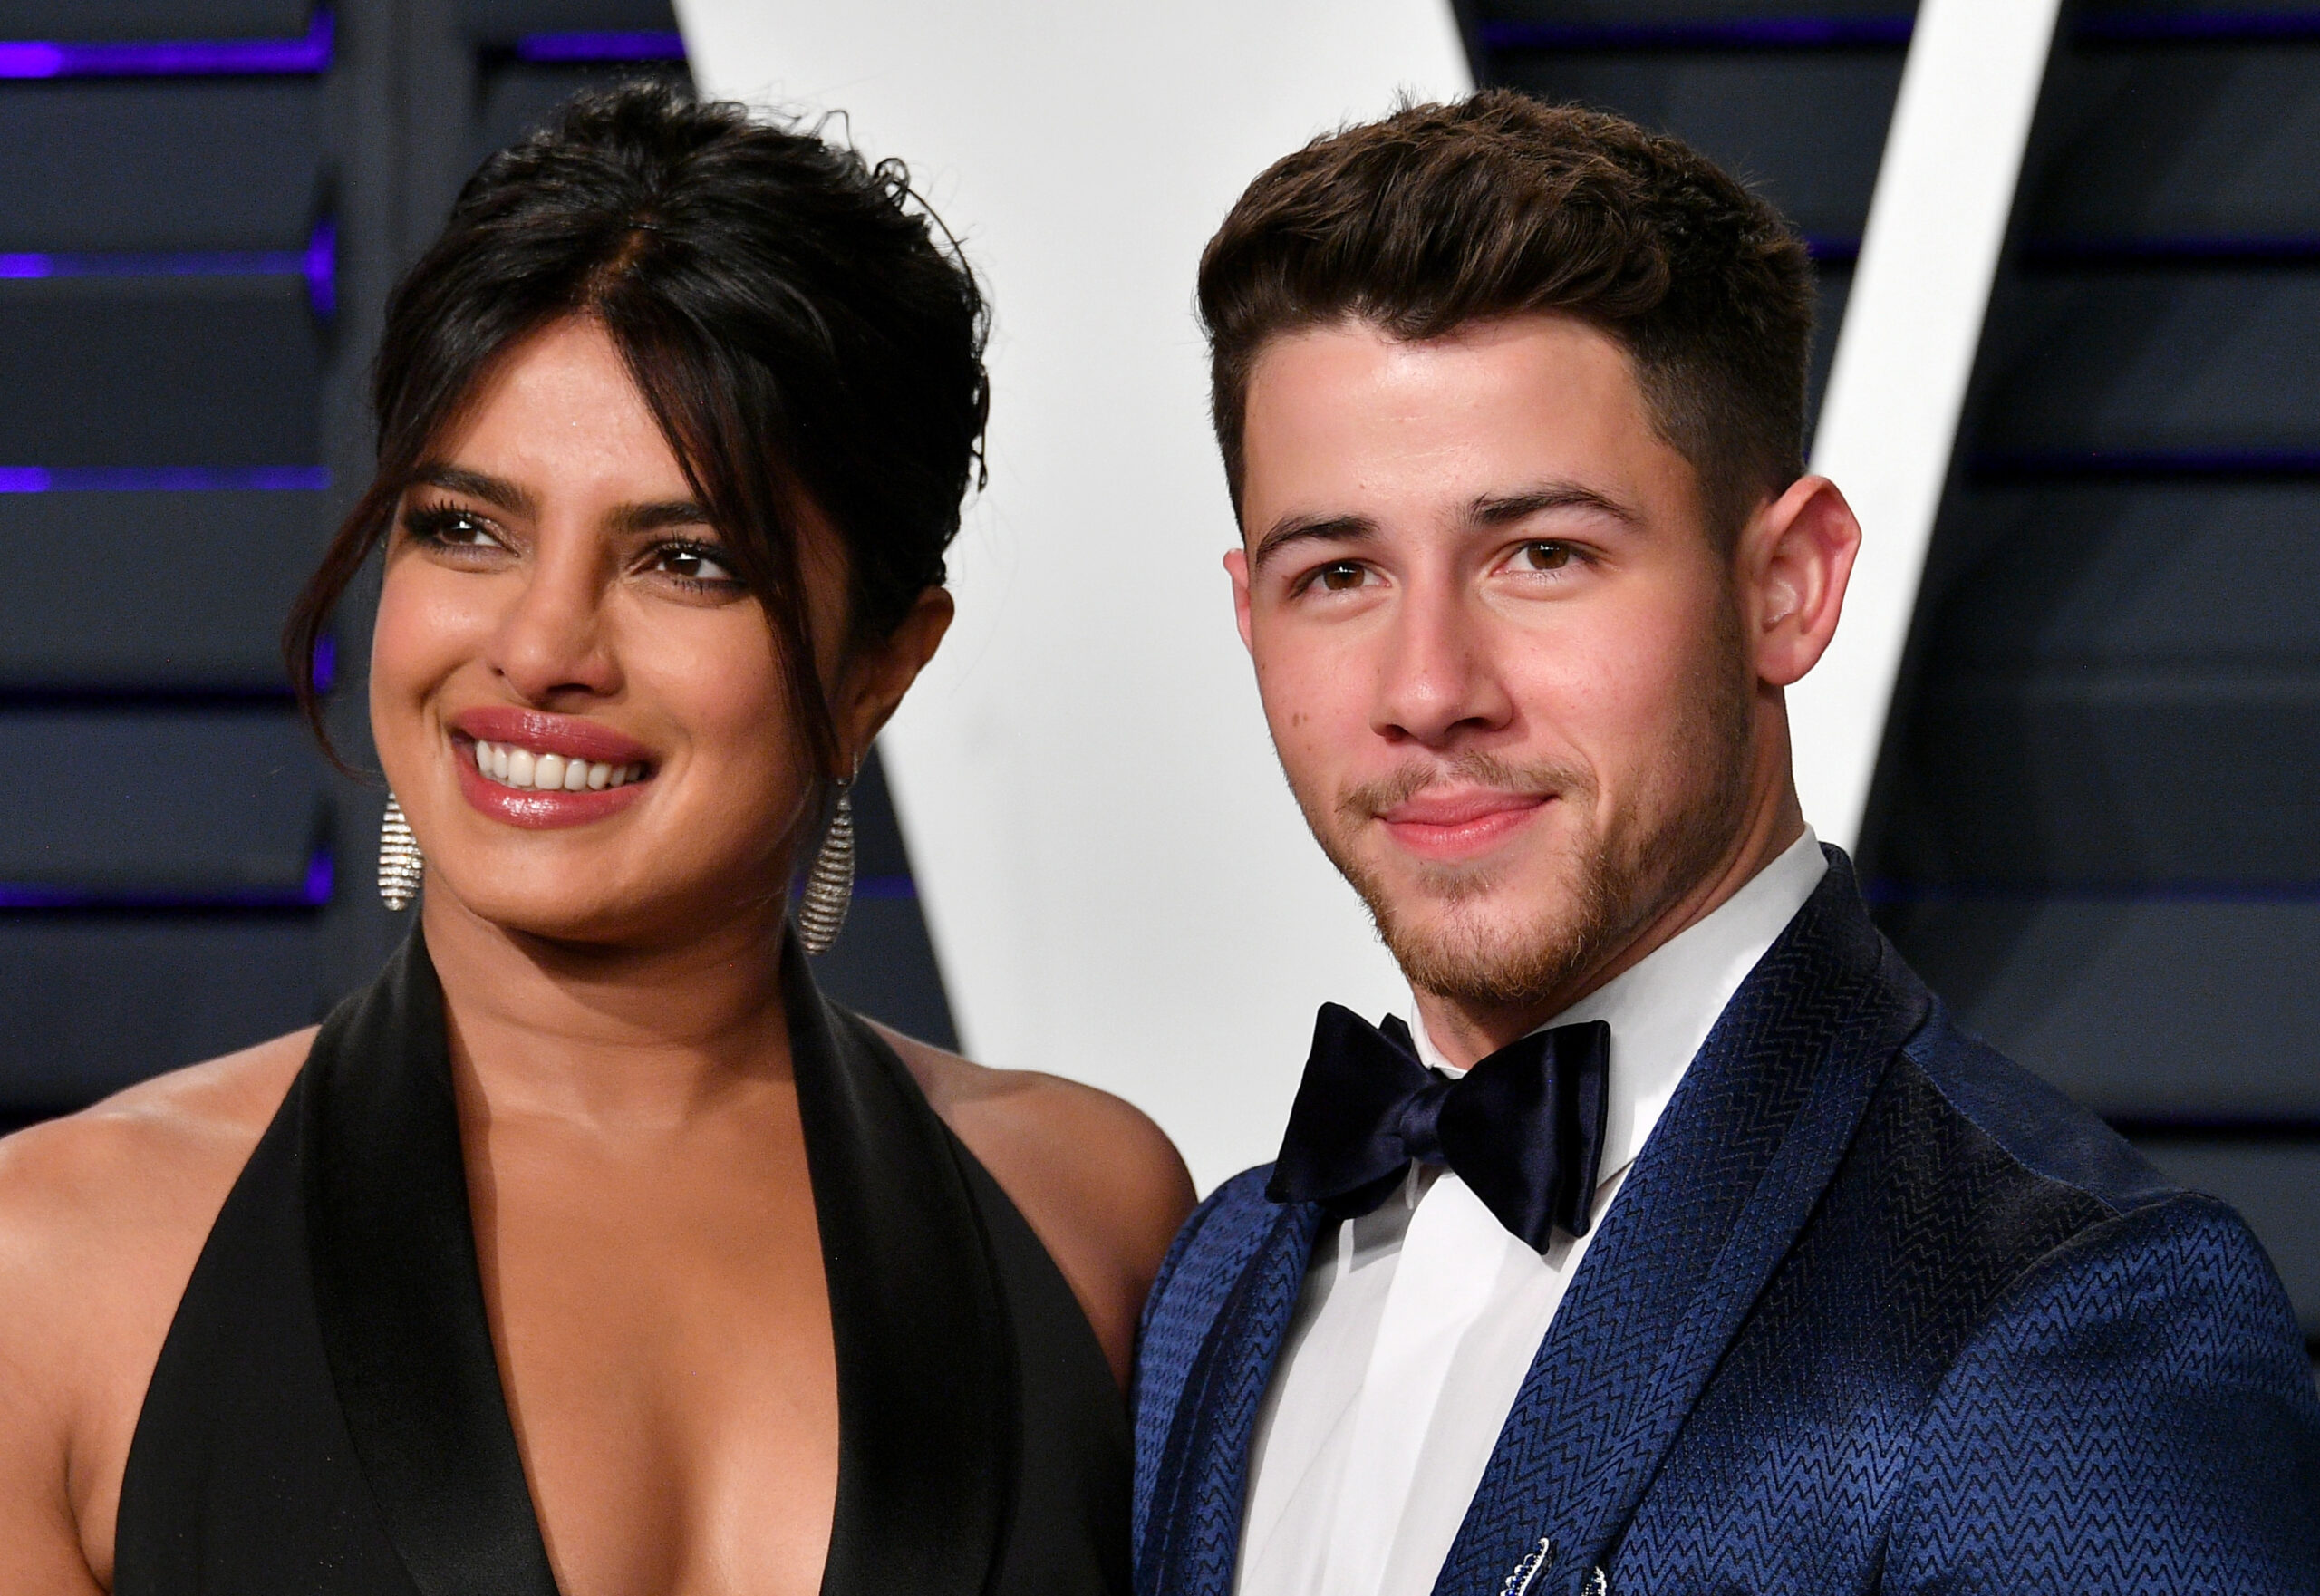 Nick Jonas to honor wife on Father’s Day, says it’s “more about her than me.”